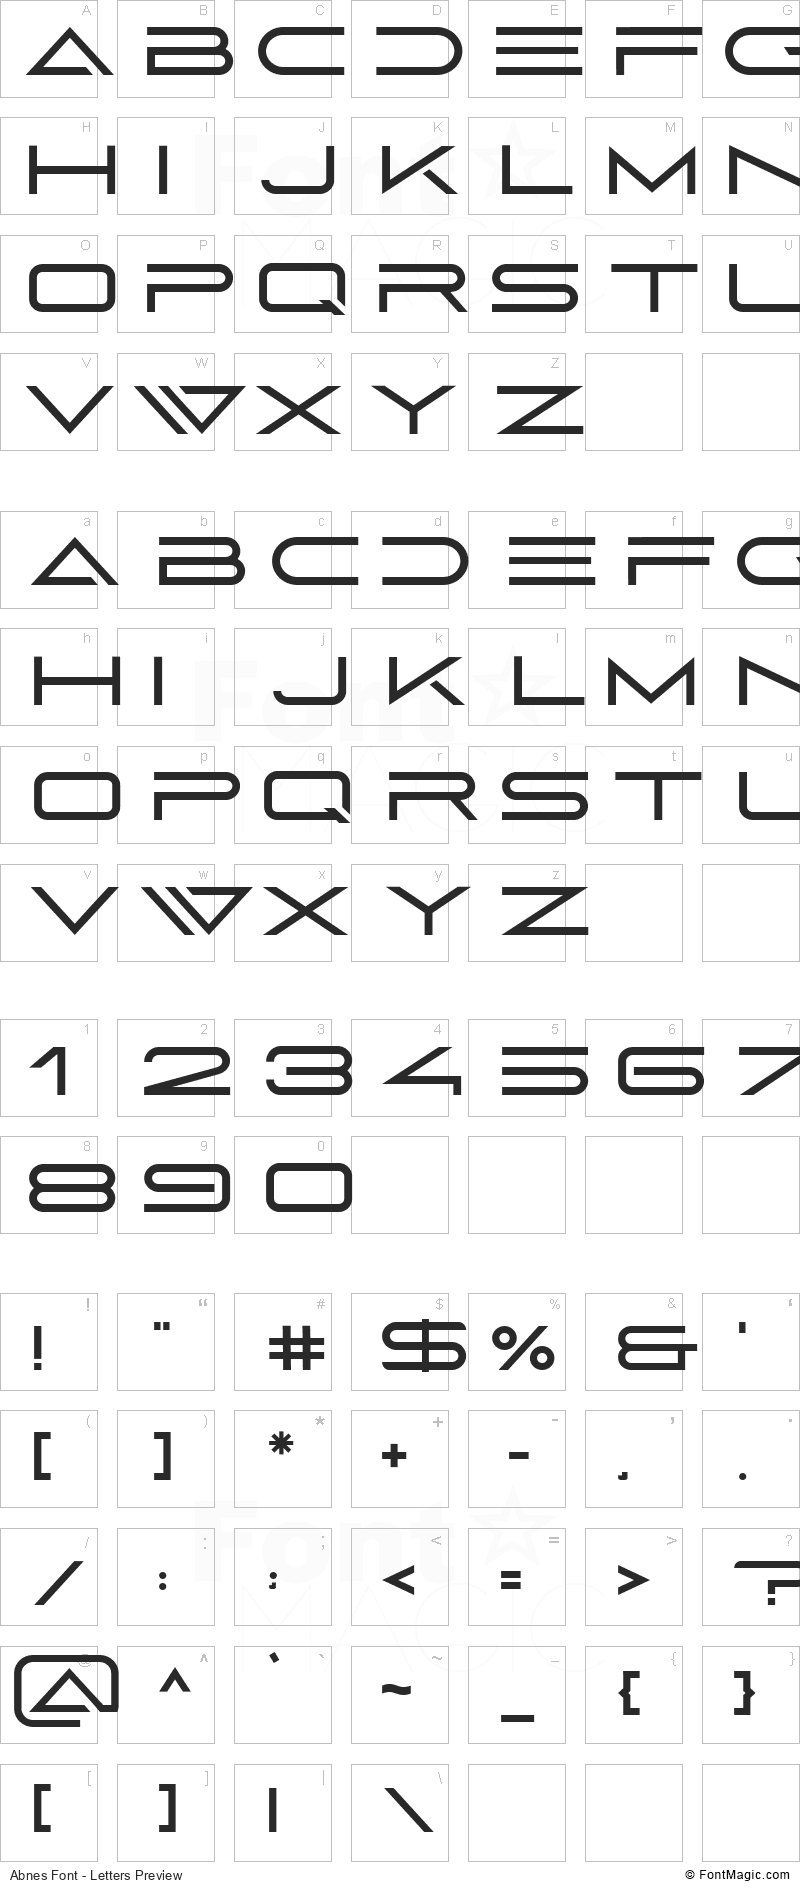 Abnes Font - All Latters Preview Chart